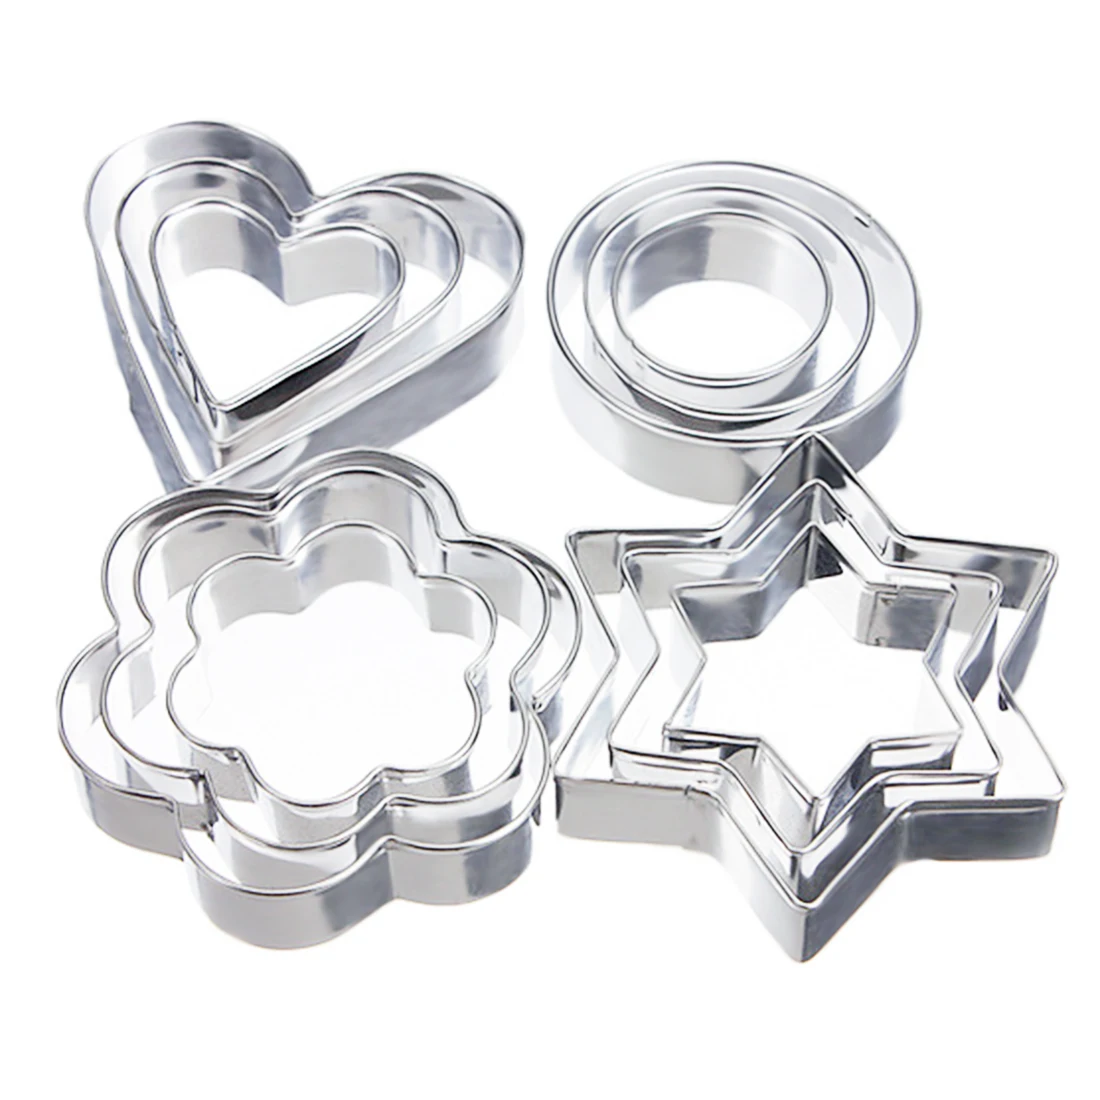 

Hot 12pc/set Baking Molds Stainless Steel Cookie Cutters Biscuit DIY Stencils Star Shape Cake Mold Kitchen Bakeware Pastry Tools